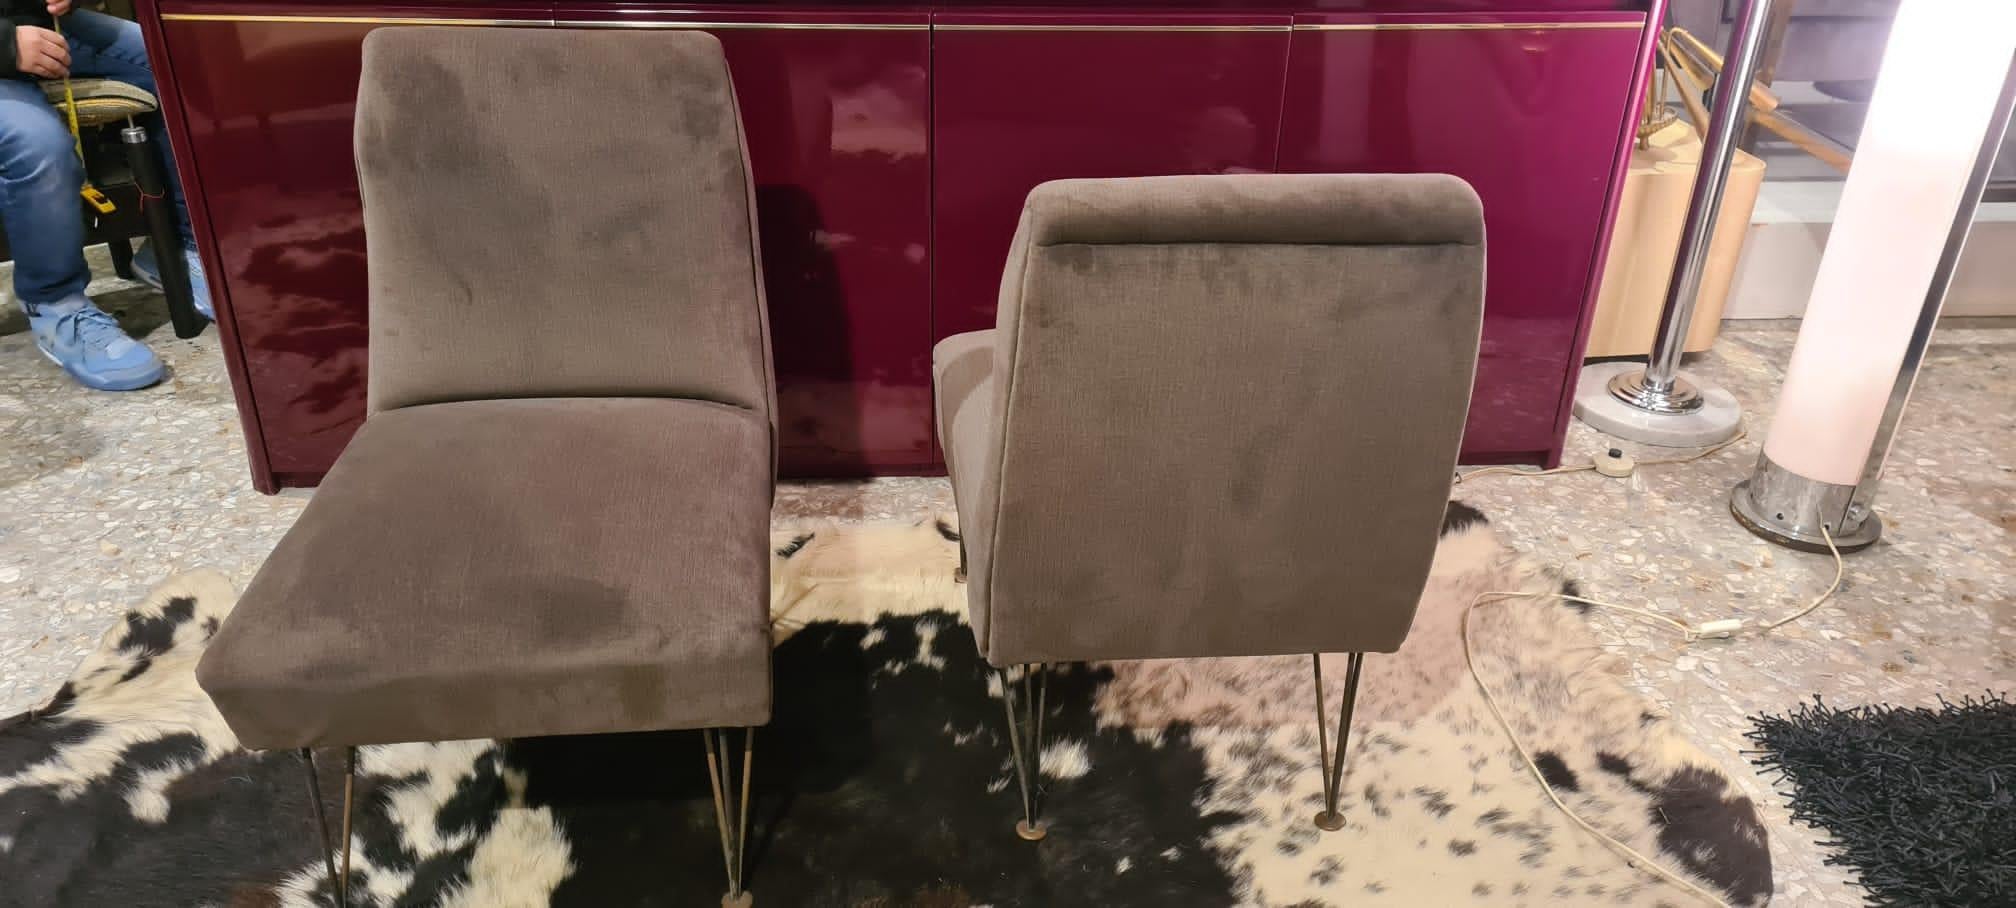 Pair of armchairs produced in Italy in the 60s, attributable for style and manufacturing to the Rima company. The armchairs have been reworked and are in excellent condition.